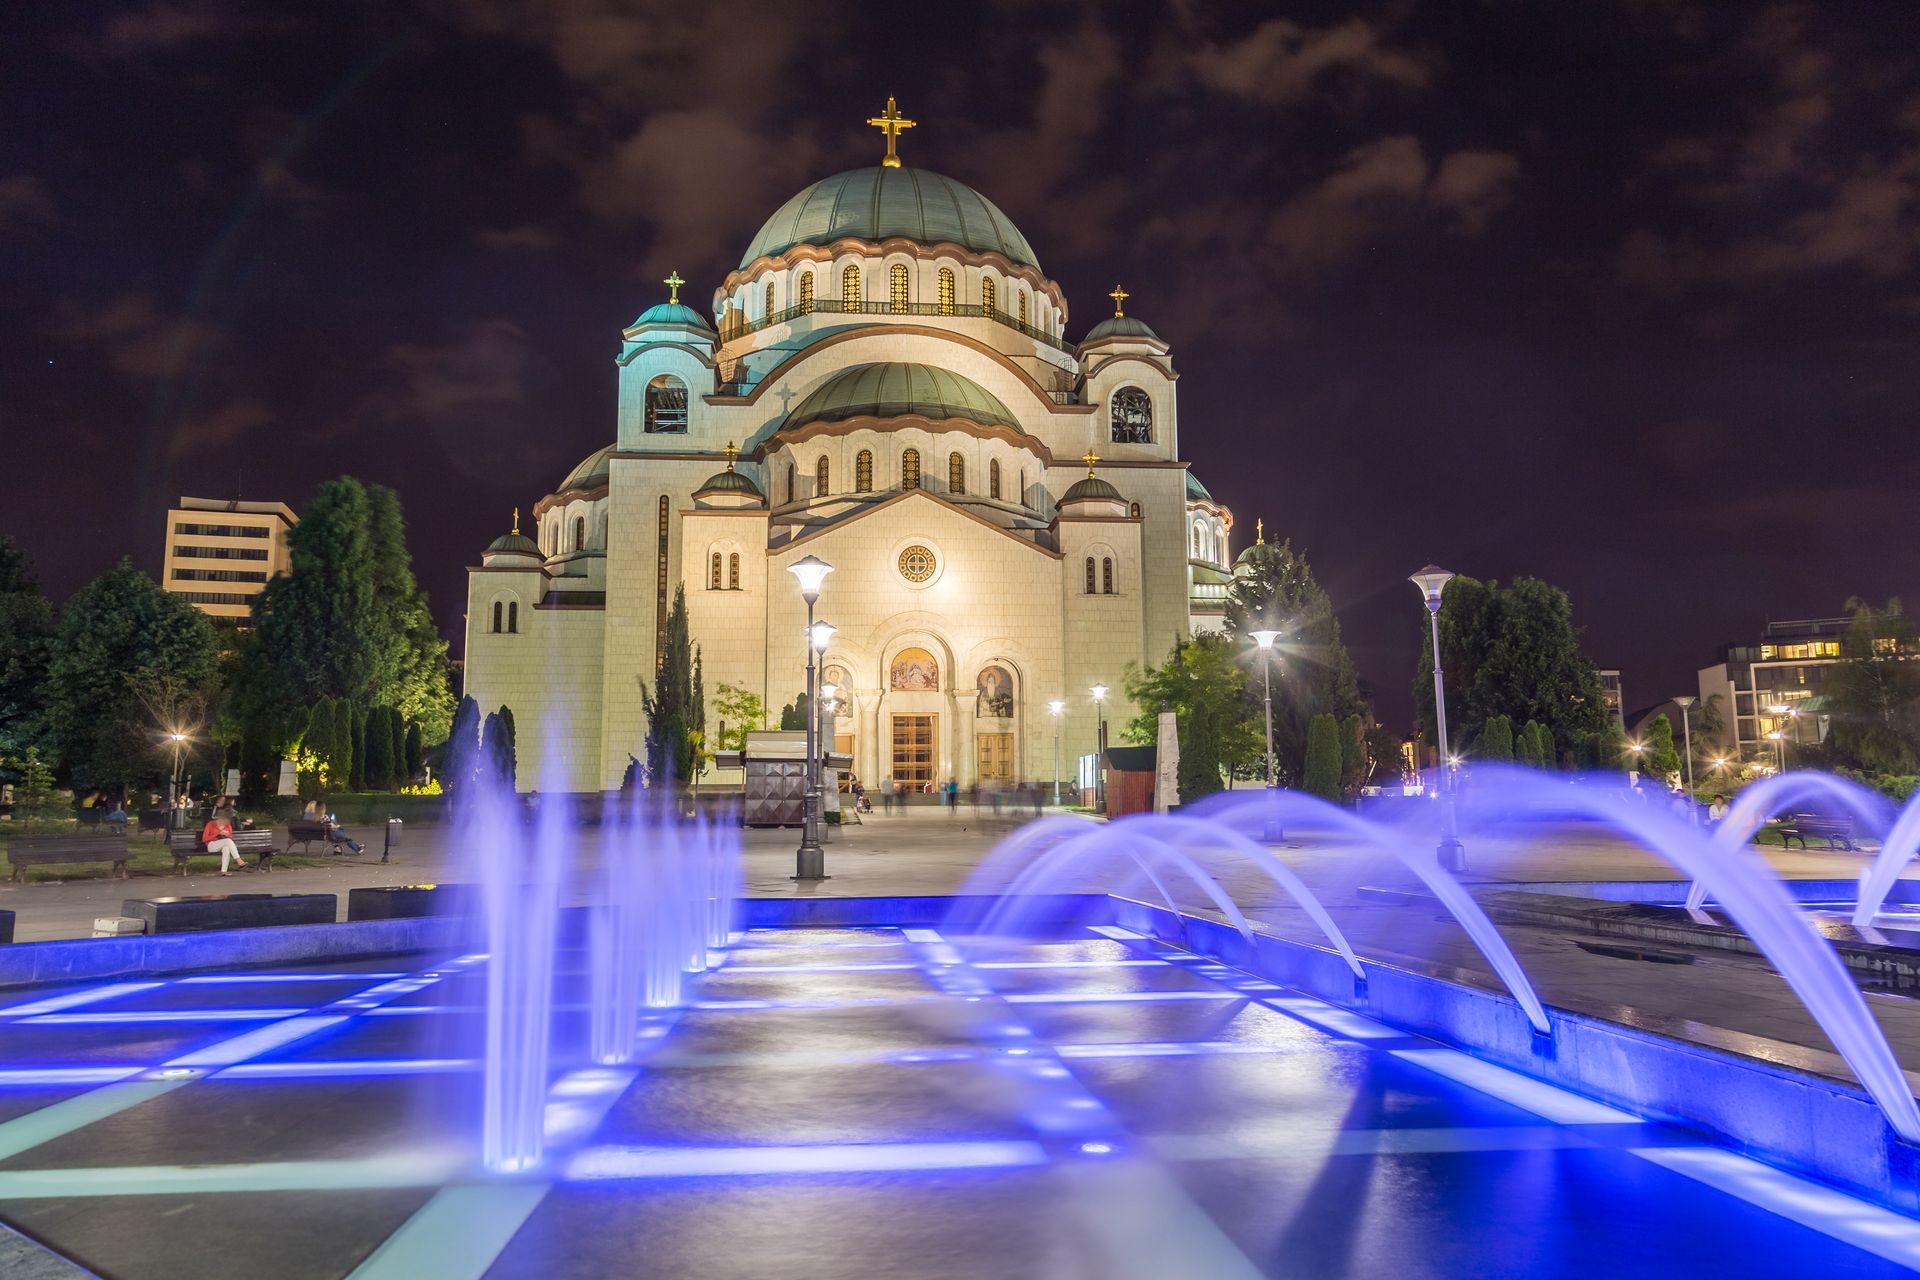 The outside of the front of Church of Saint Sava in Belgrade the capital of Serbia at night. Colourful fountains can be seen in the foreground.